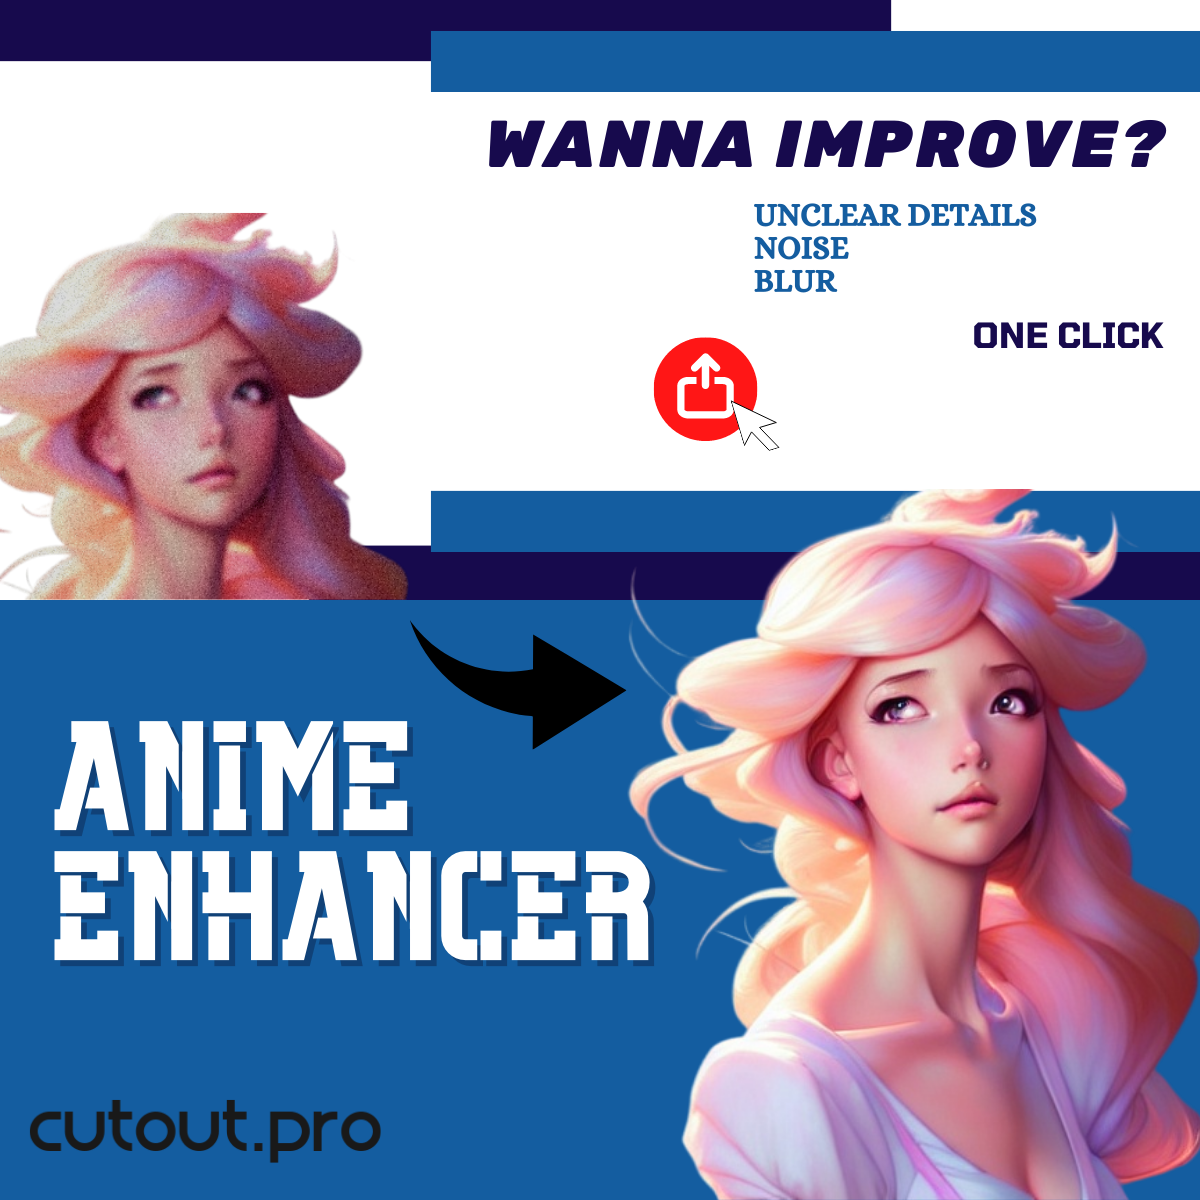 Anime Enhancer product by cutout.pro